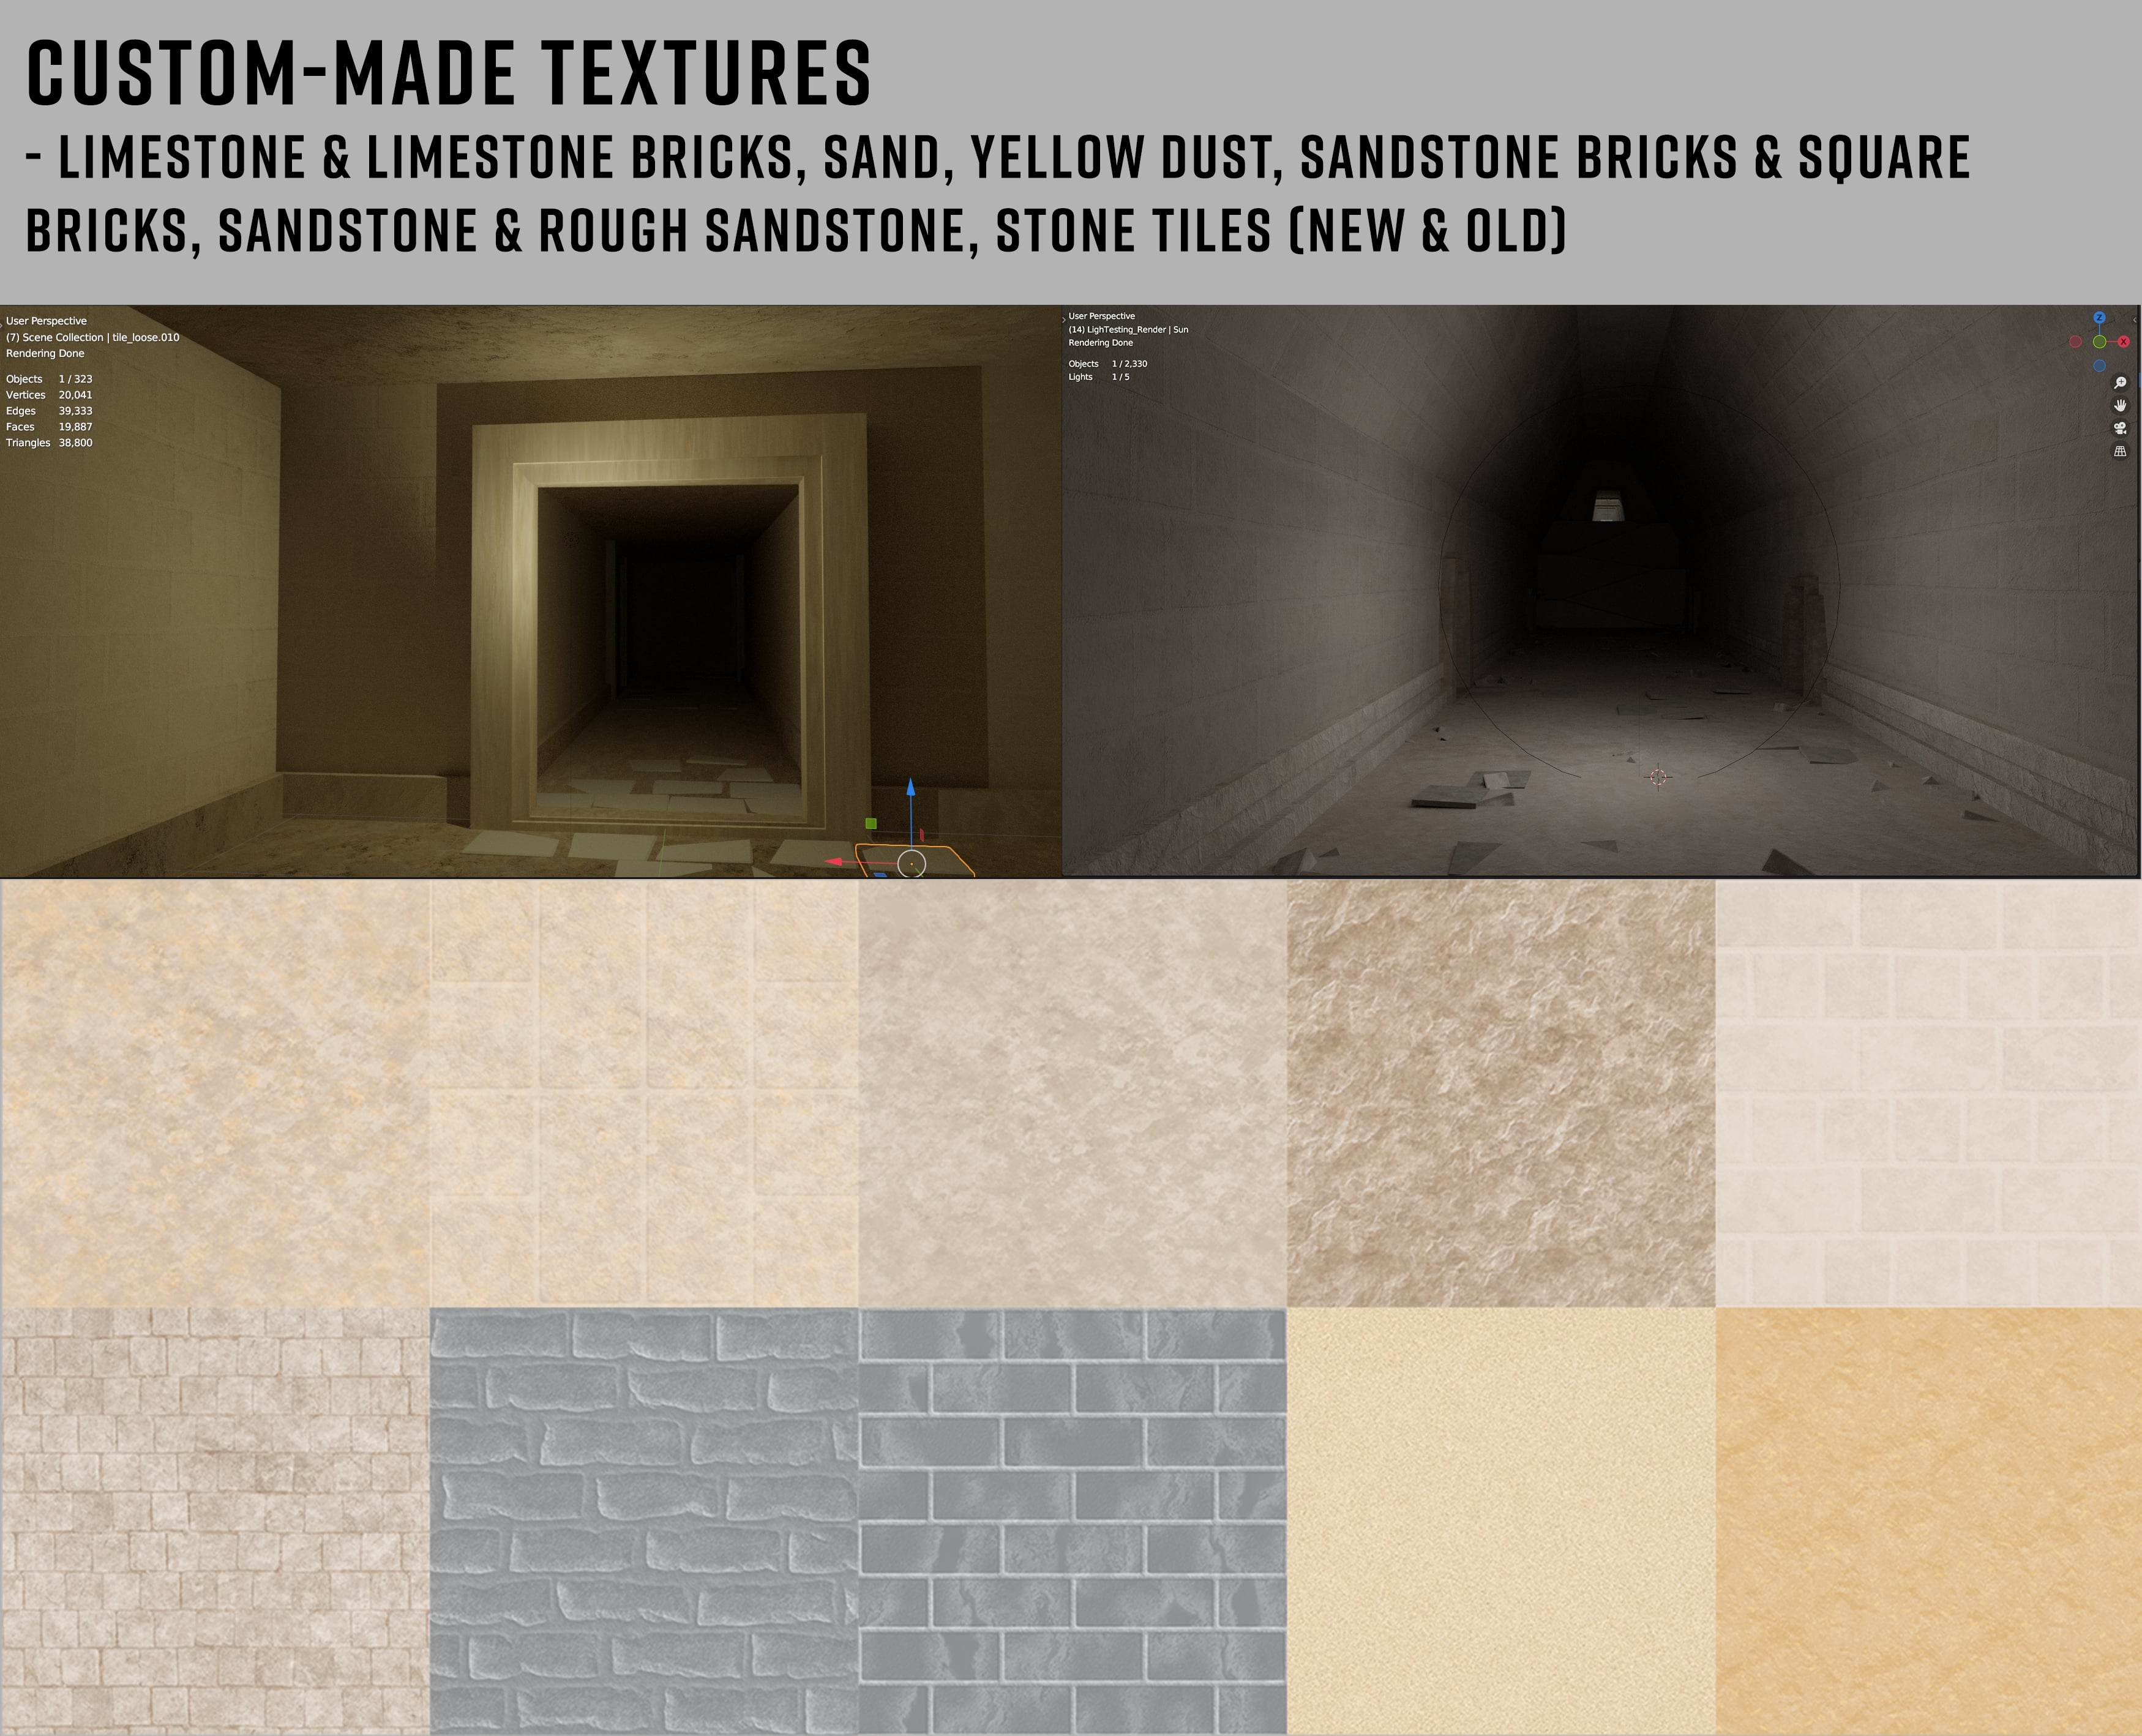 Custom-made textures for in-game models and environments